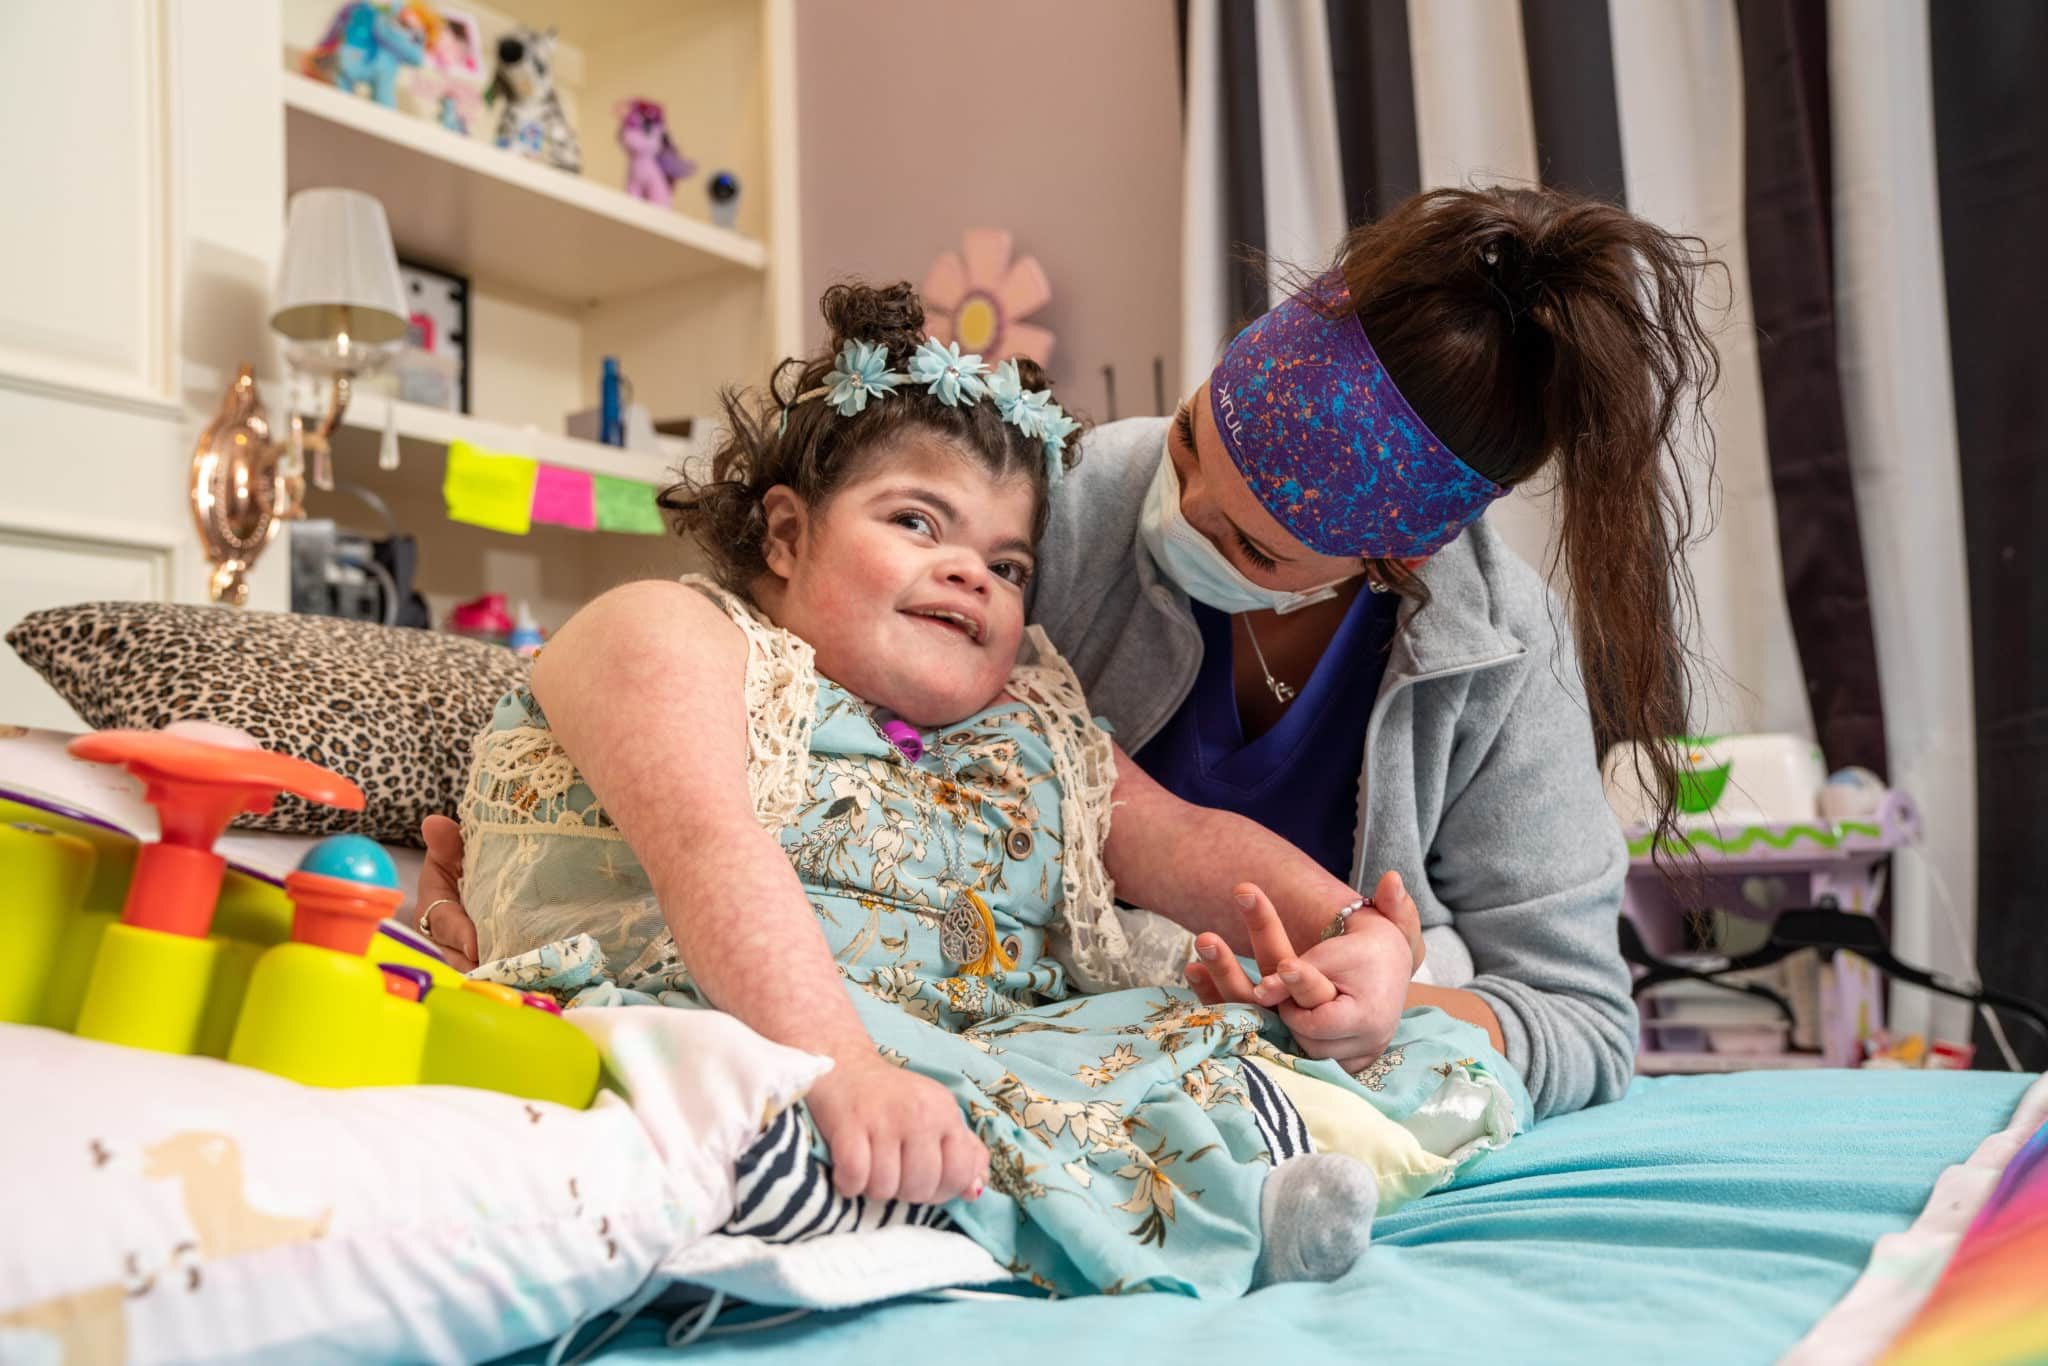 Expert Tips for Transitioning to In-Home Pediatric Care